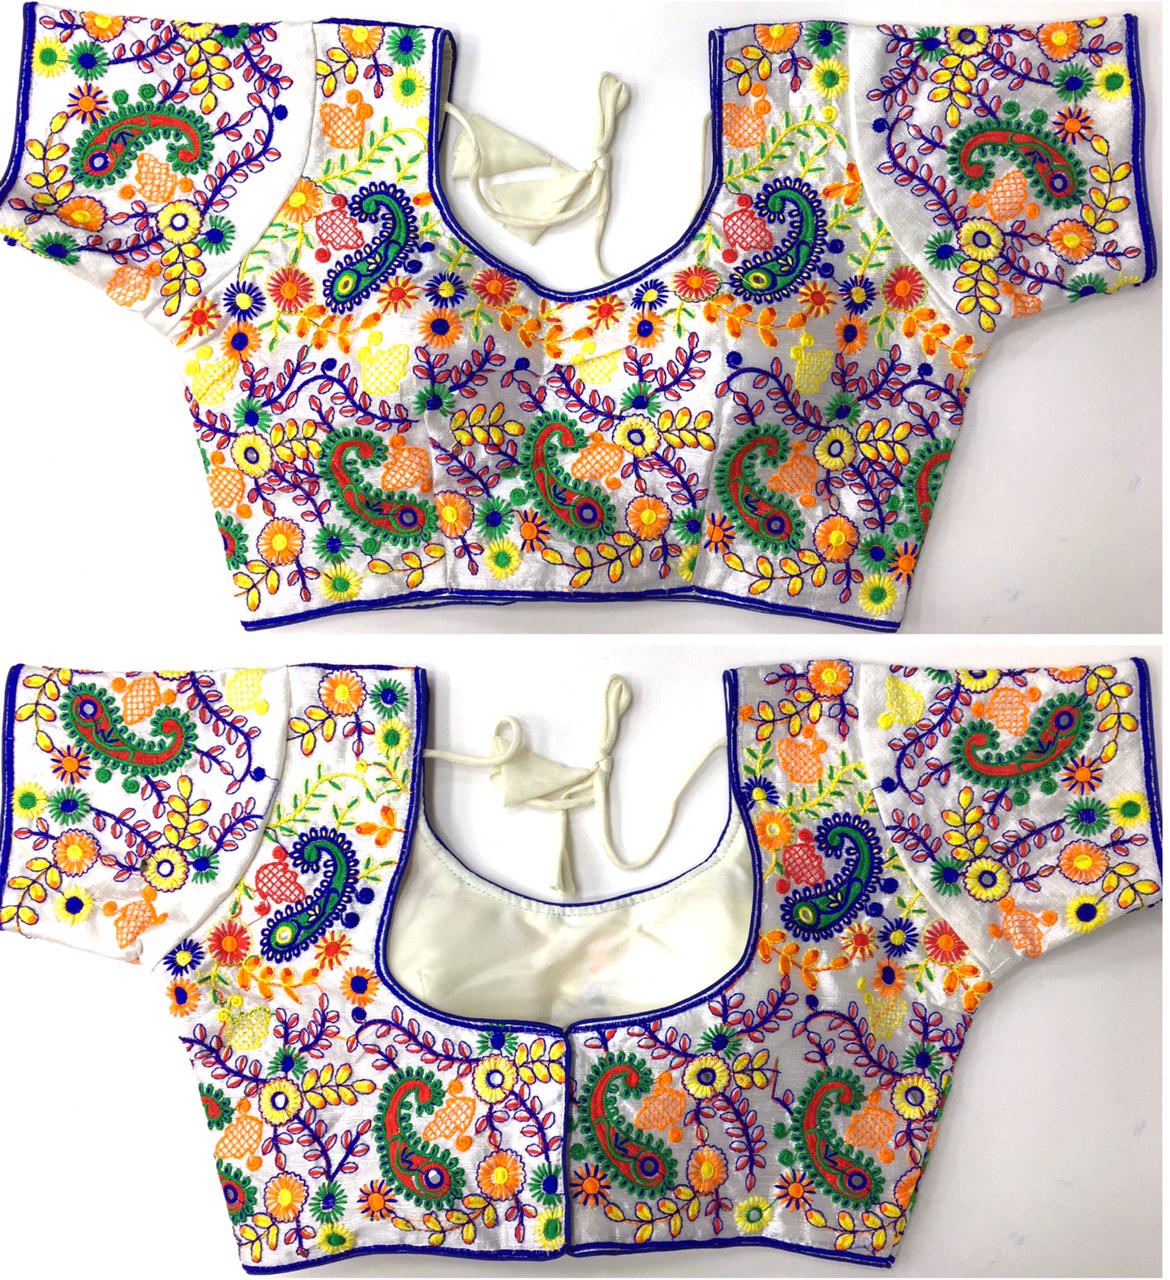 BLOUSE HAS THREAD WORK AND FOIL MIRROR WORK - Dharti Bandhani